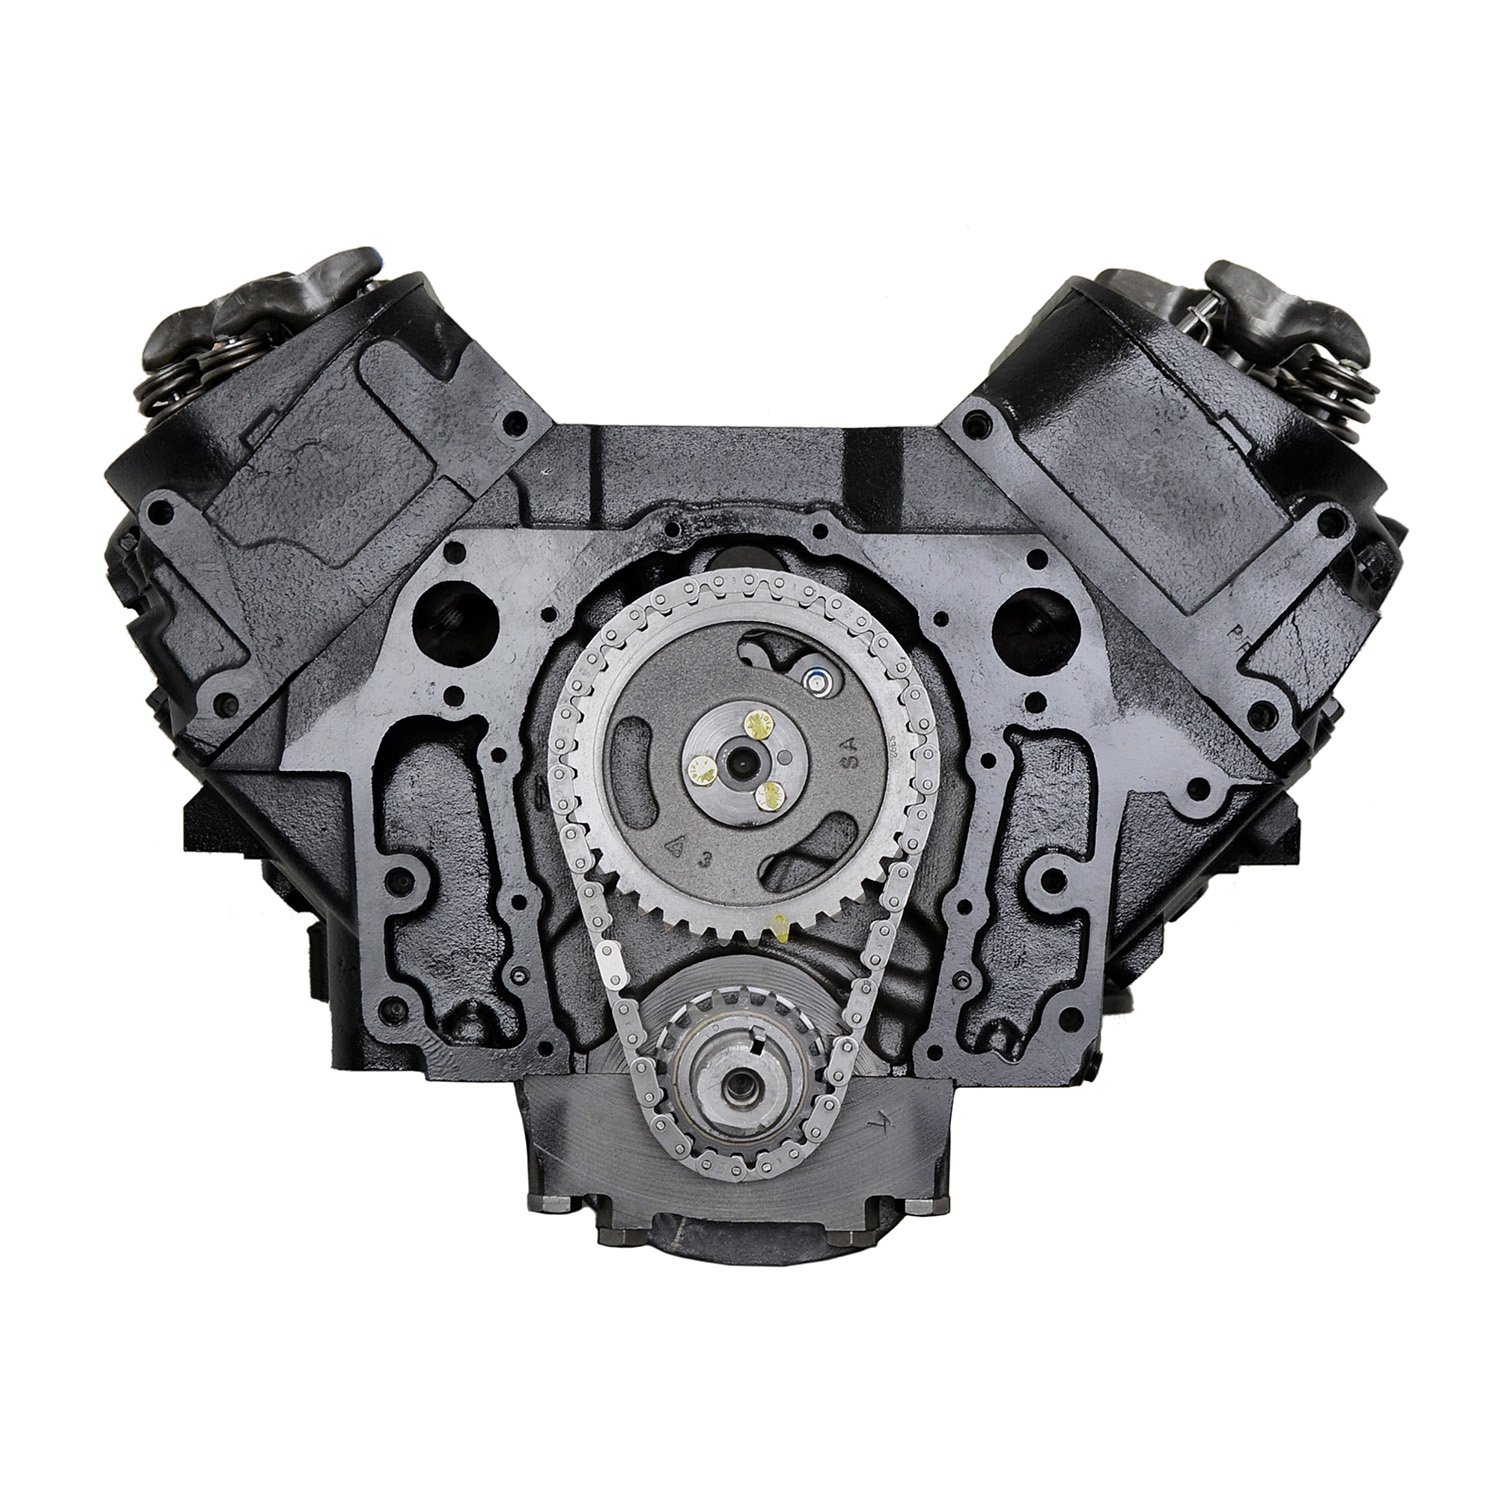 DCPP Remanufactured Crate Engine [1968-1995 Big Block Chevy 454 ci/7.4L V8 CNG]